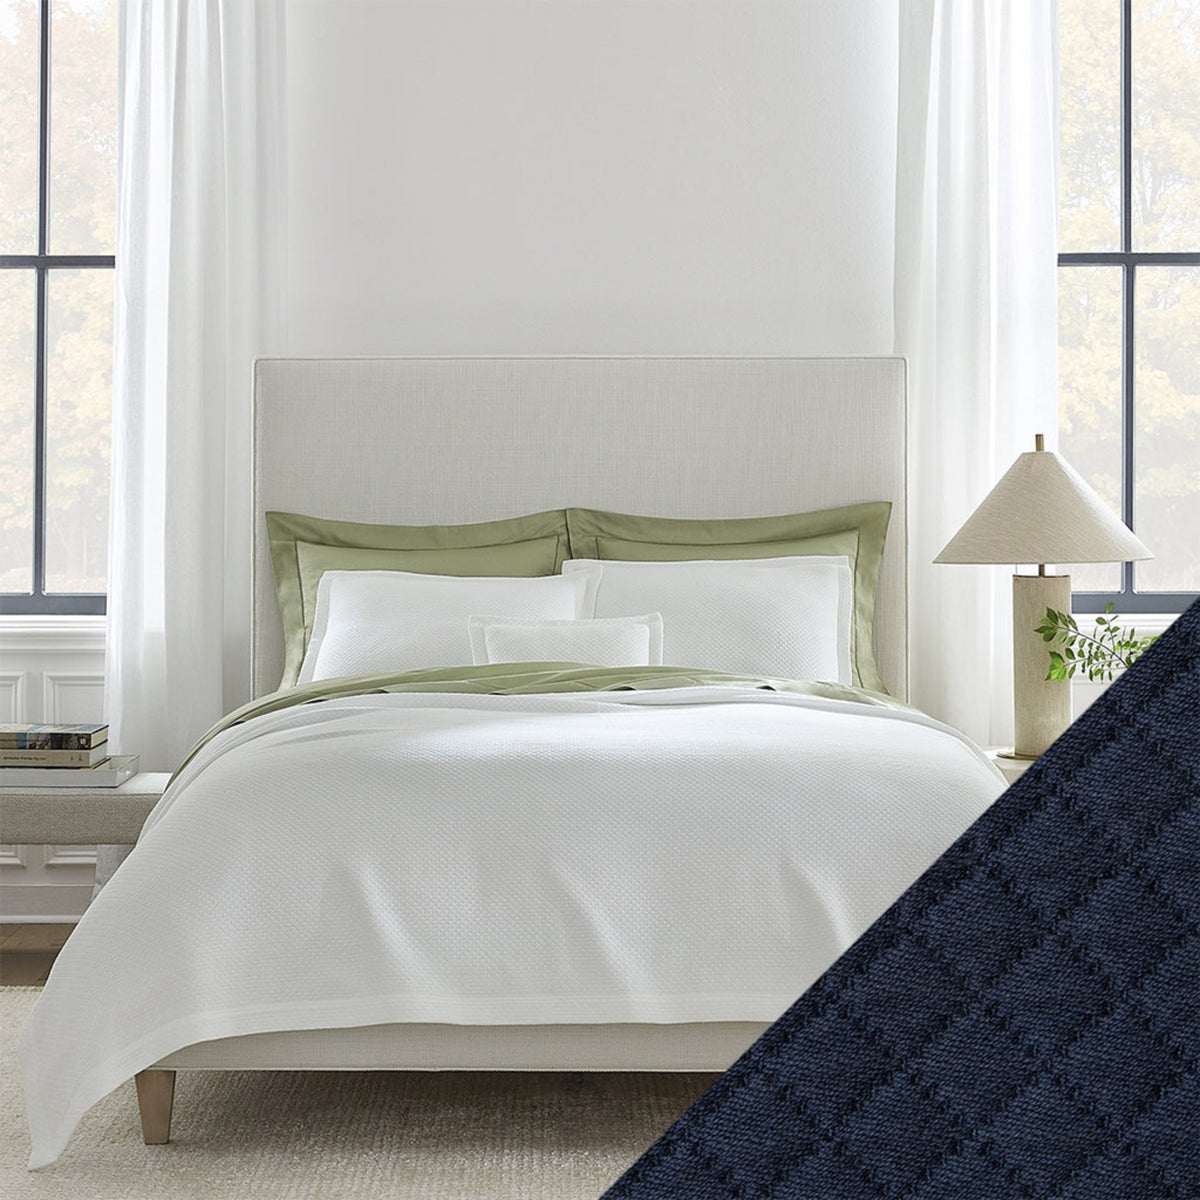 Full View of Sferra Rombo Bedding with Swatch Navy